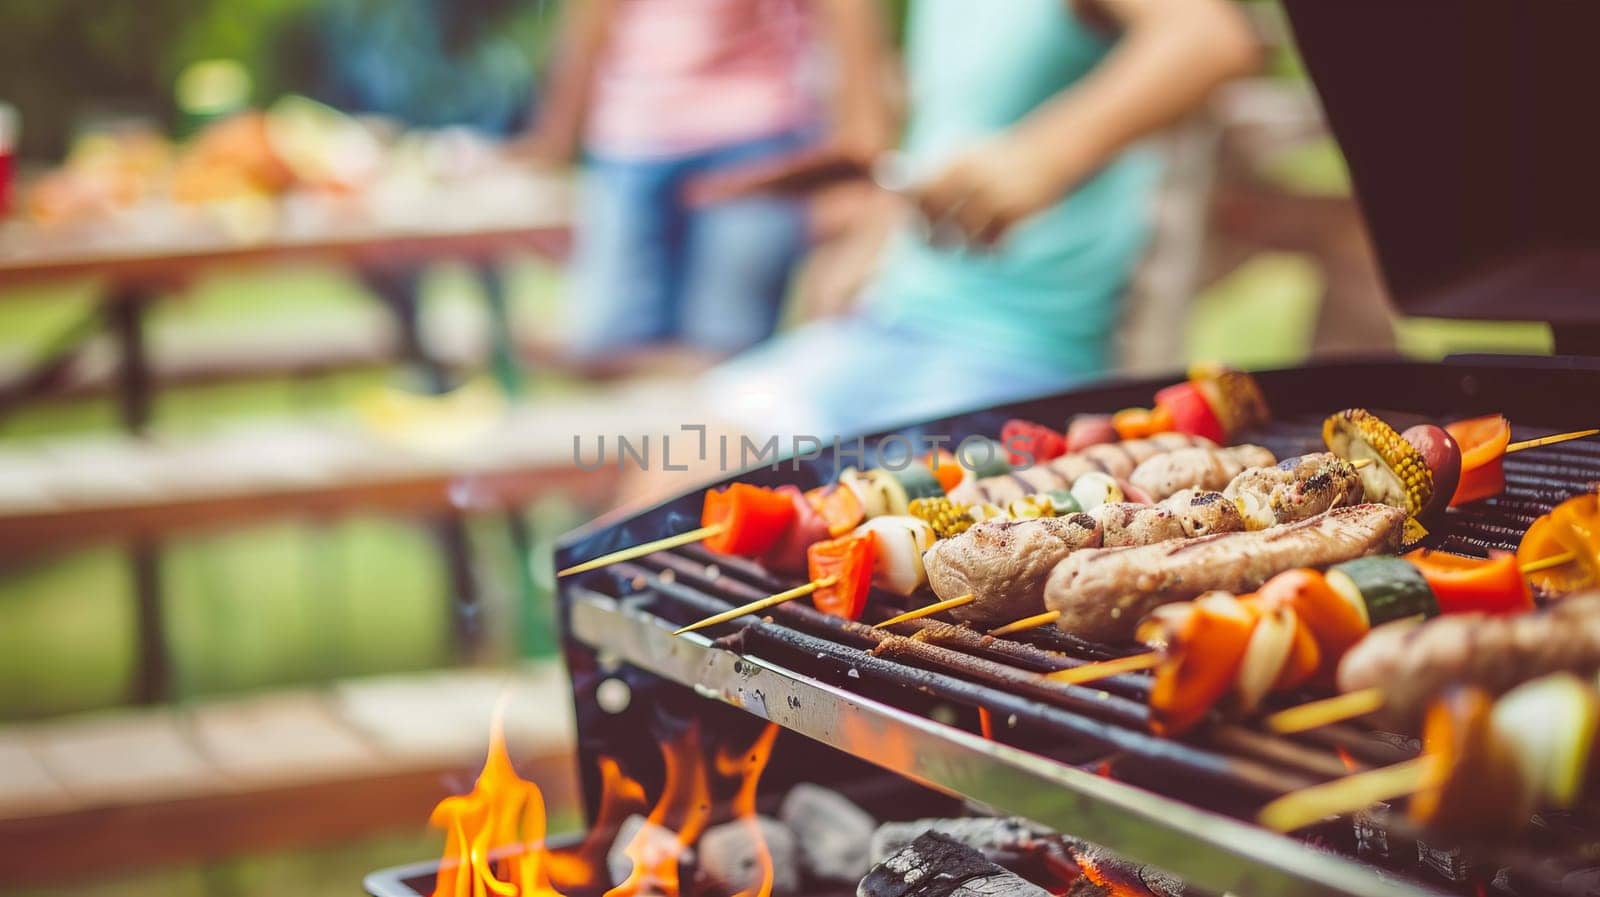 Grilling in the Backyard Barbecue with a blurred background, with copy space by NataliPopova